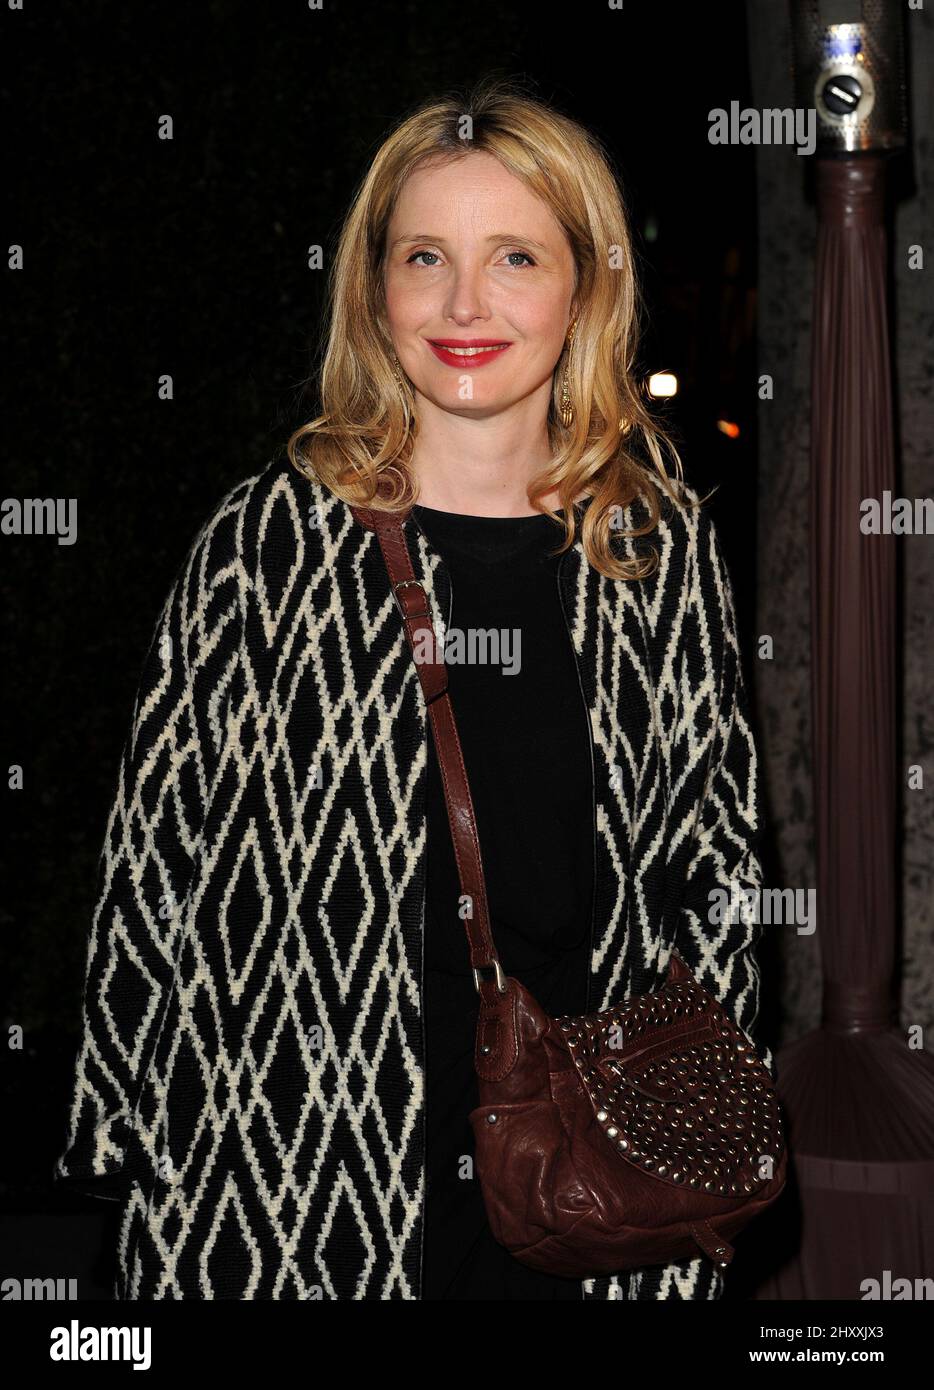 Julie Delpy attending the Chanel Pre-Oscar Dinner held at Madeo Restaurant in Los Angeles, USA. Stock Photo